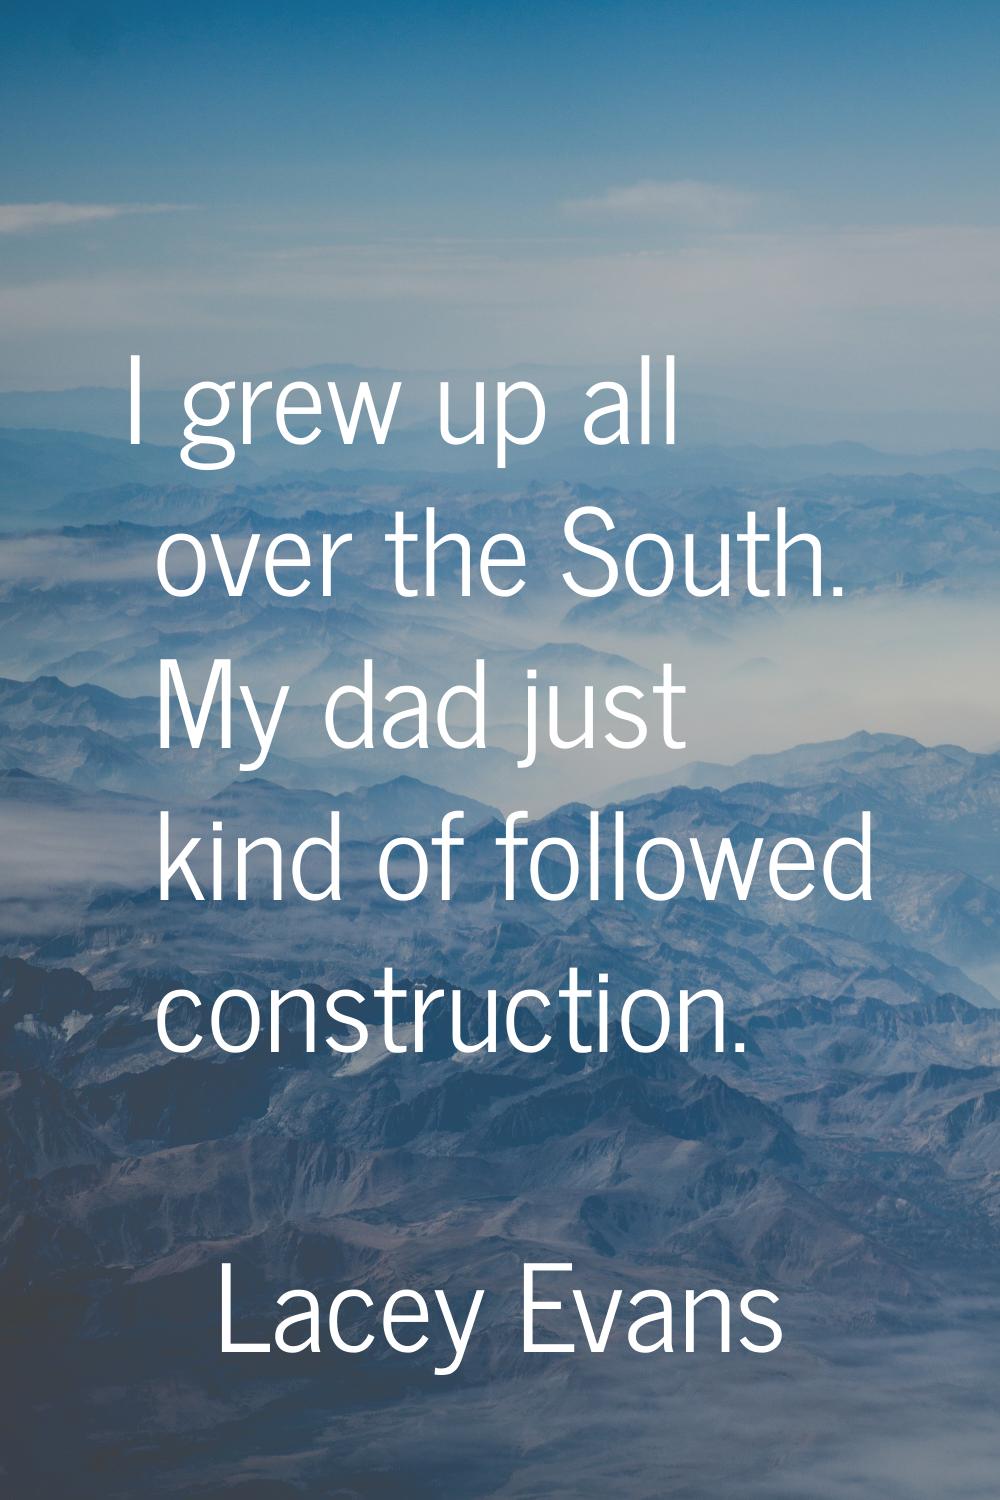 I grew up all over the South. My dad just kind of followed construction.